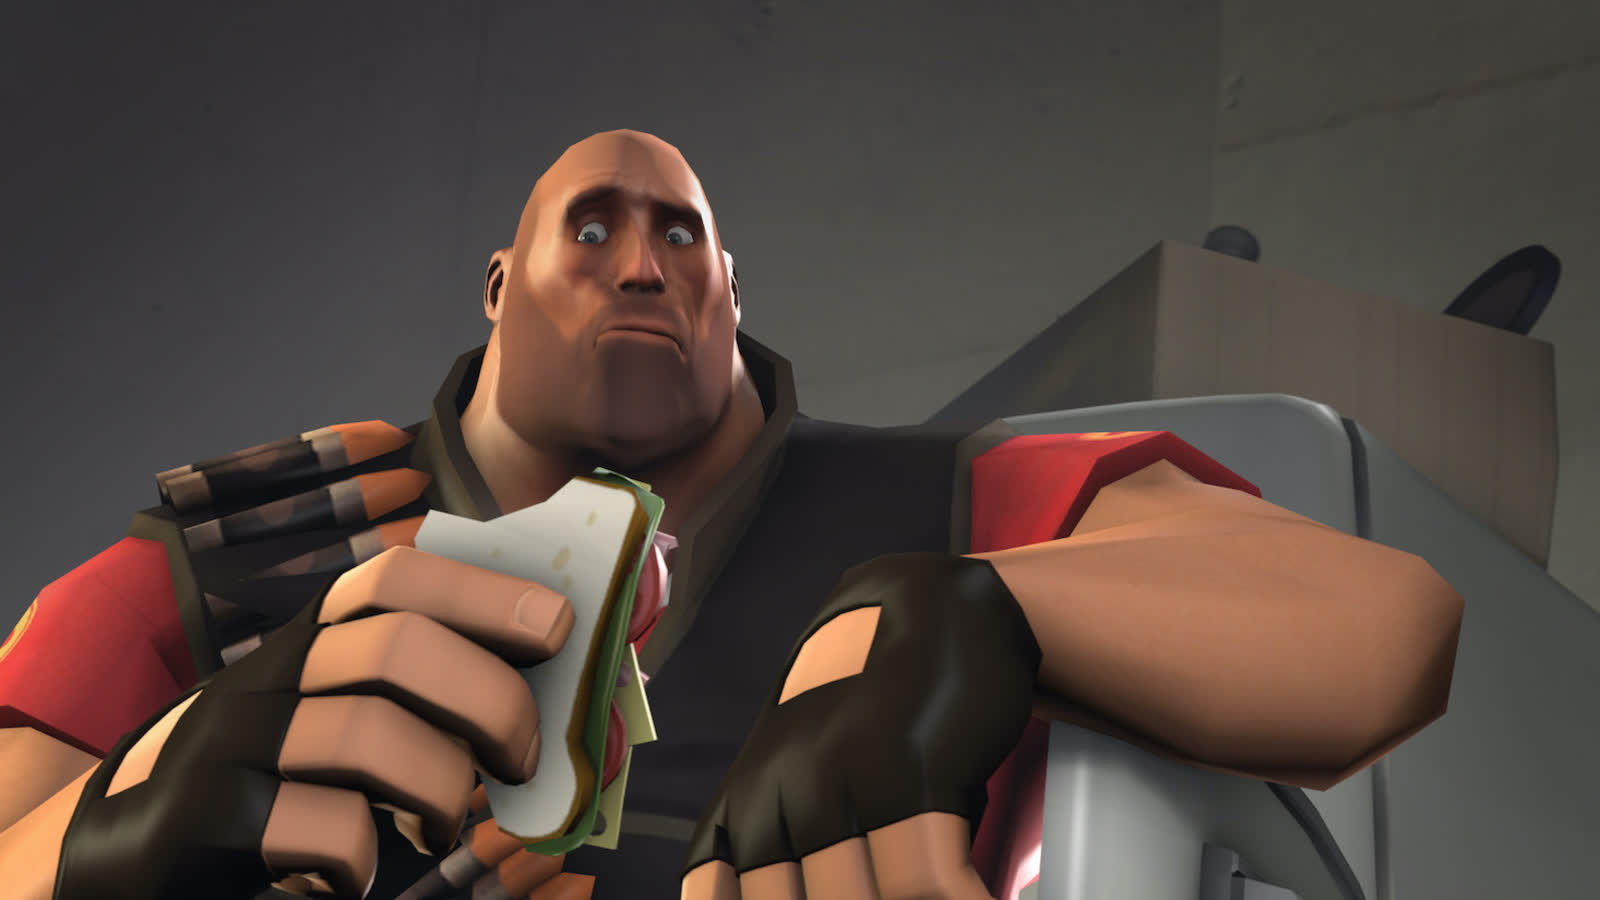 Team Fortress 2 is poised for a big summer update